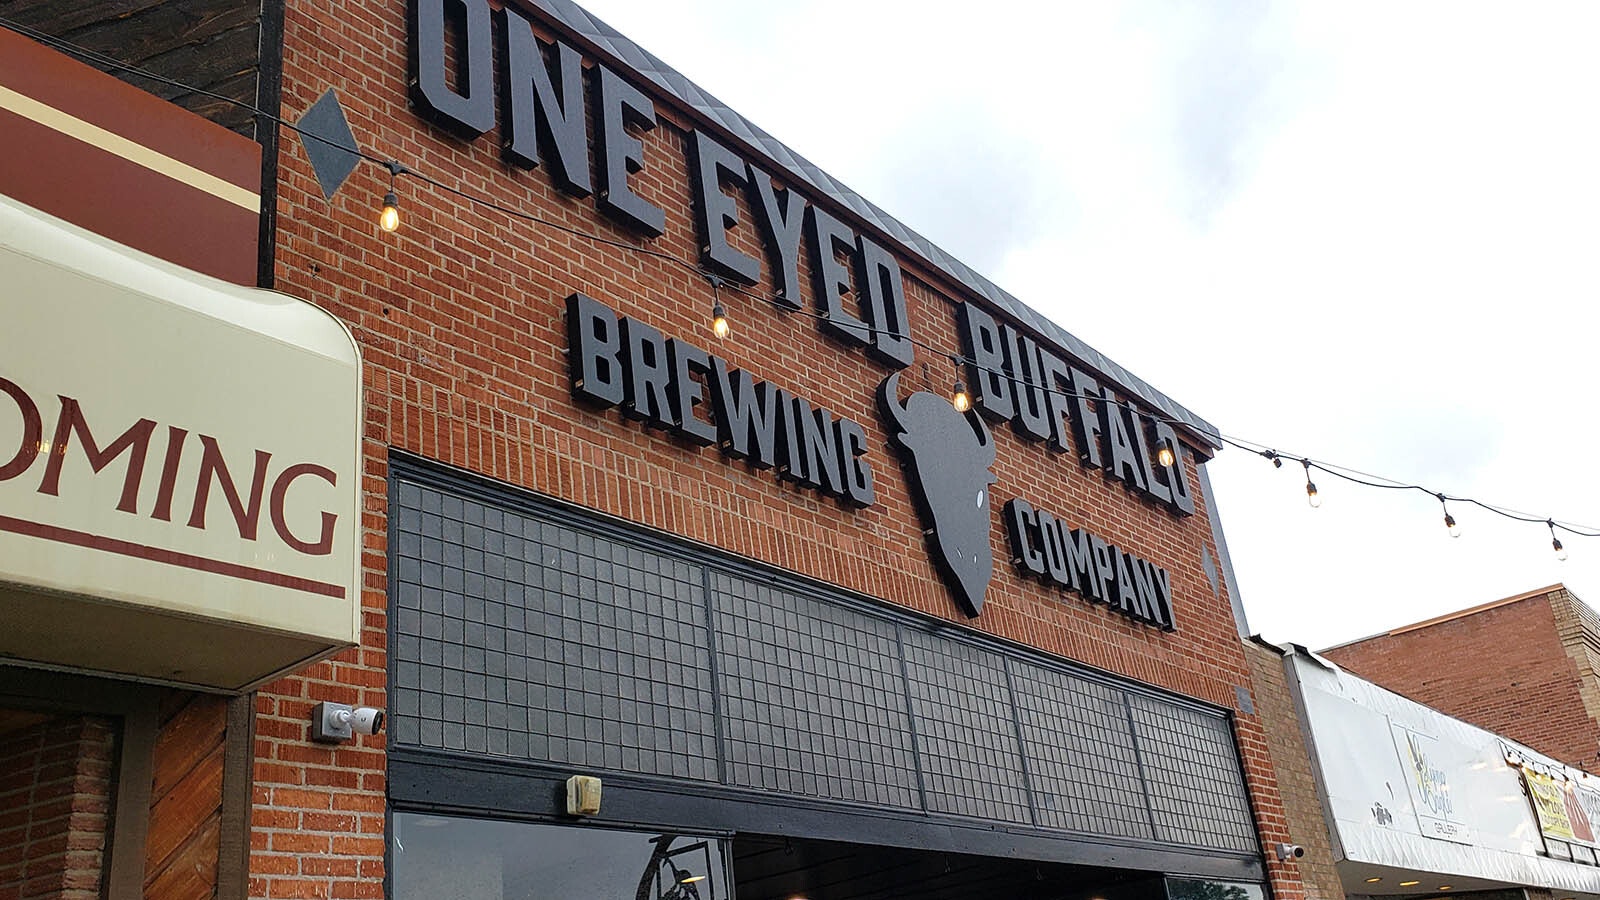 One Eyed Buffalo Brewing Co. is so popular it has three locations in Thermopolis.